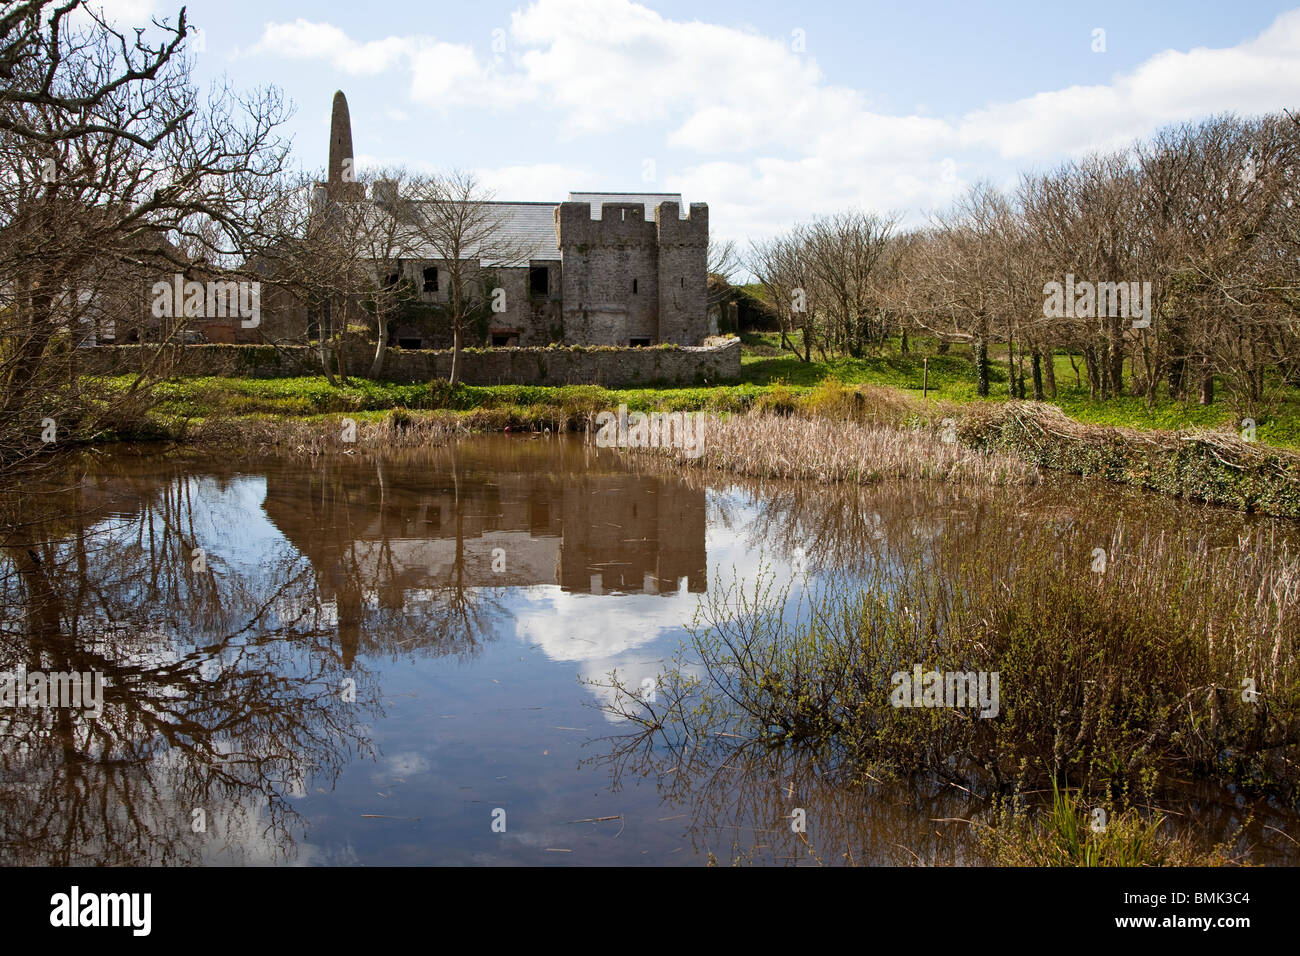 The old priory and St Illtyd's church with the mediaeval pond Caldey Island Wales UK Stock Photo